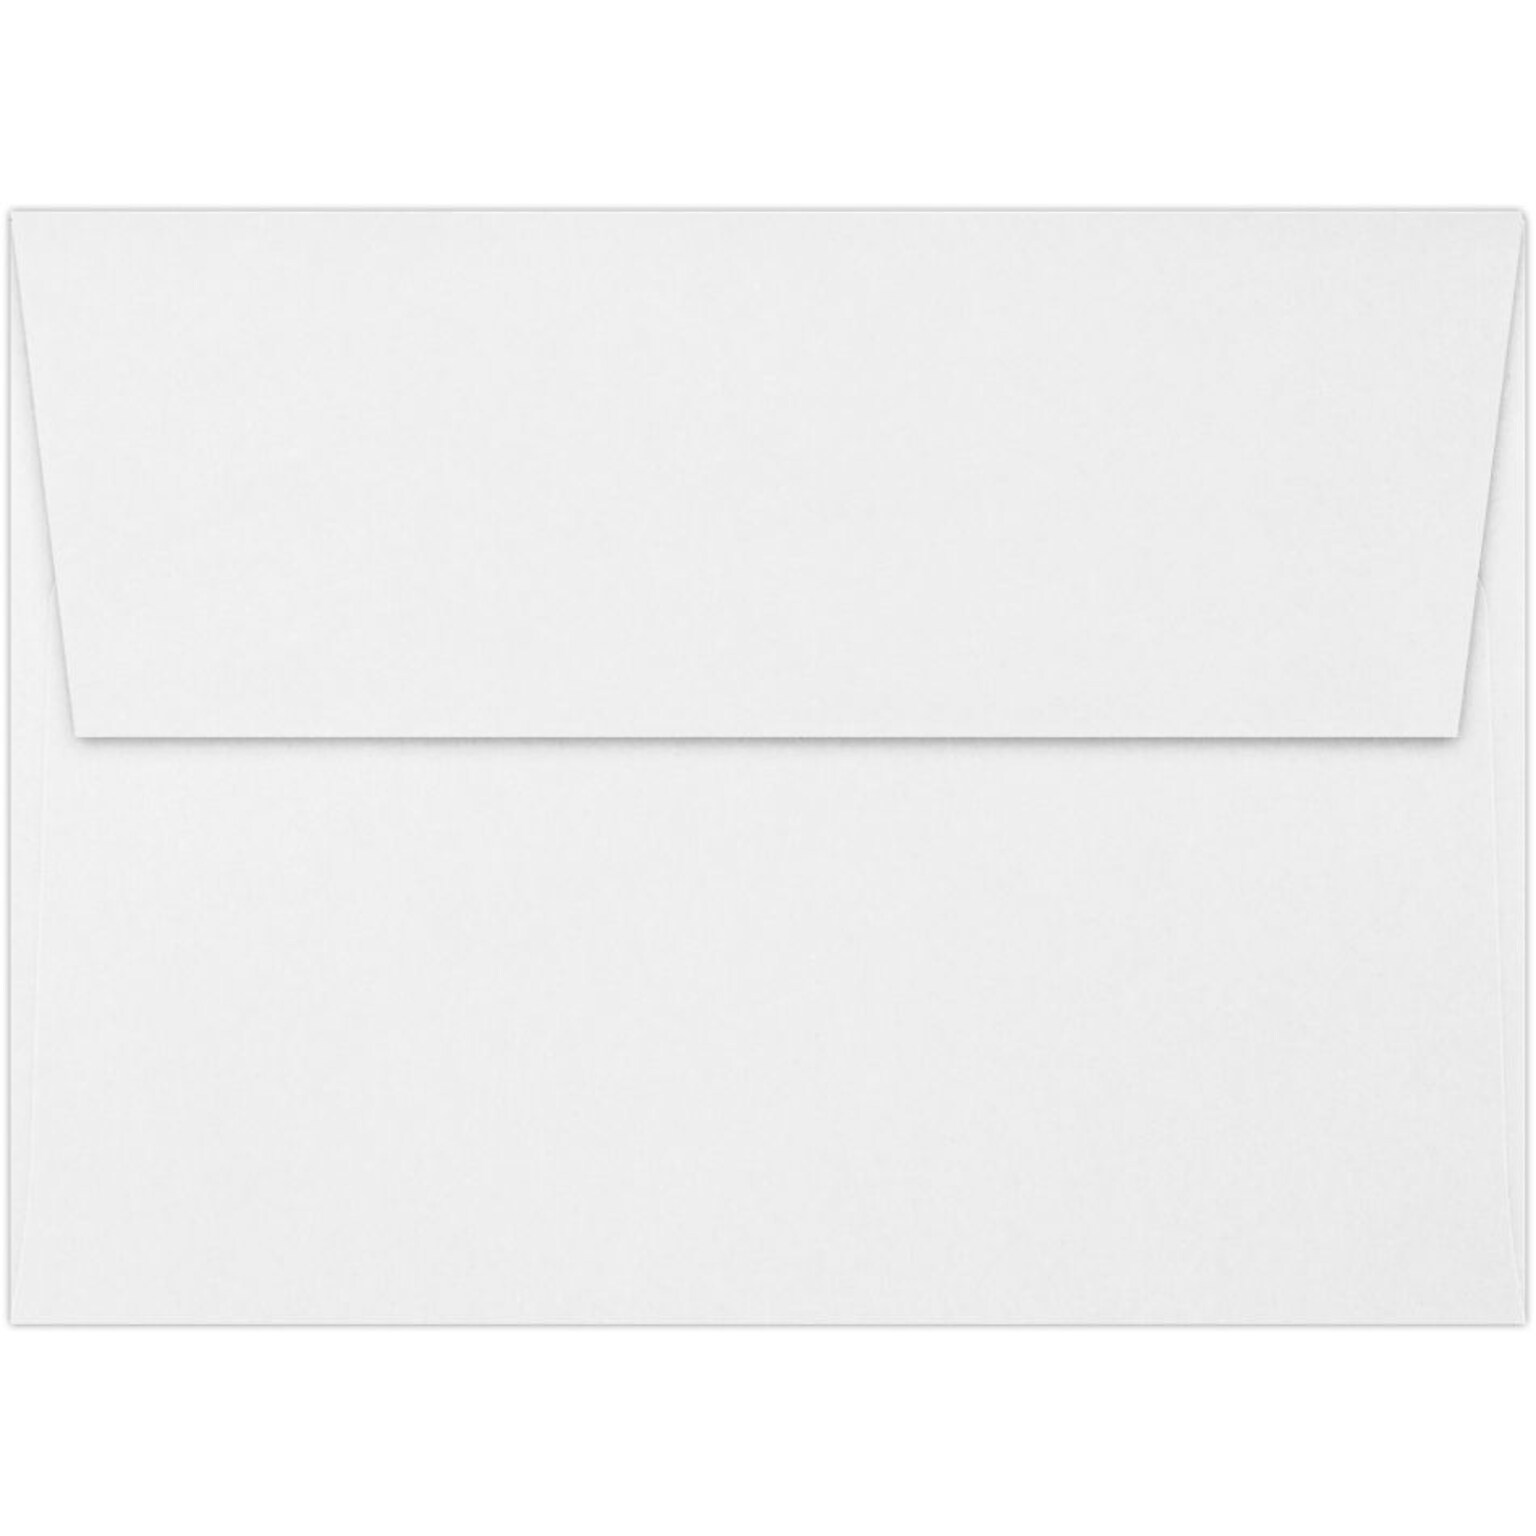 LUX A7 Invitation Envelopes (5 1/4 x 7 1/4) 250/Pack, 70lb. Classic Linen® Bright White - 100% Recycled (880-70RBWLI-250)